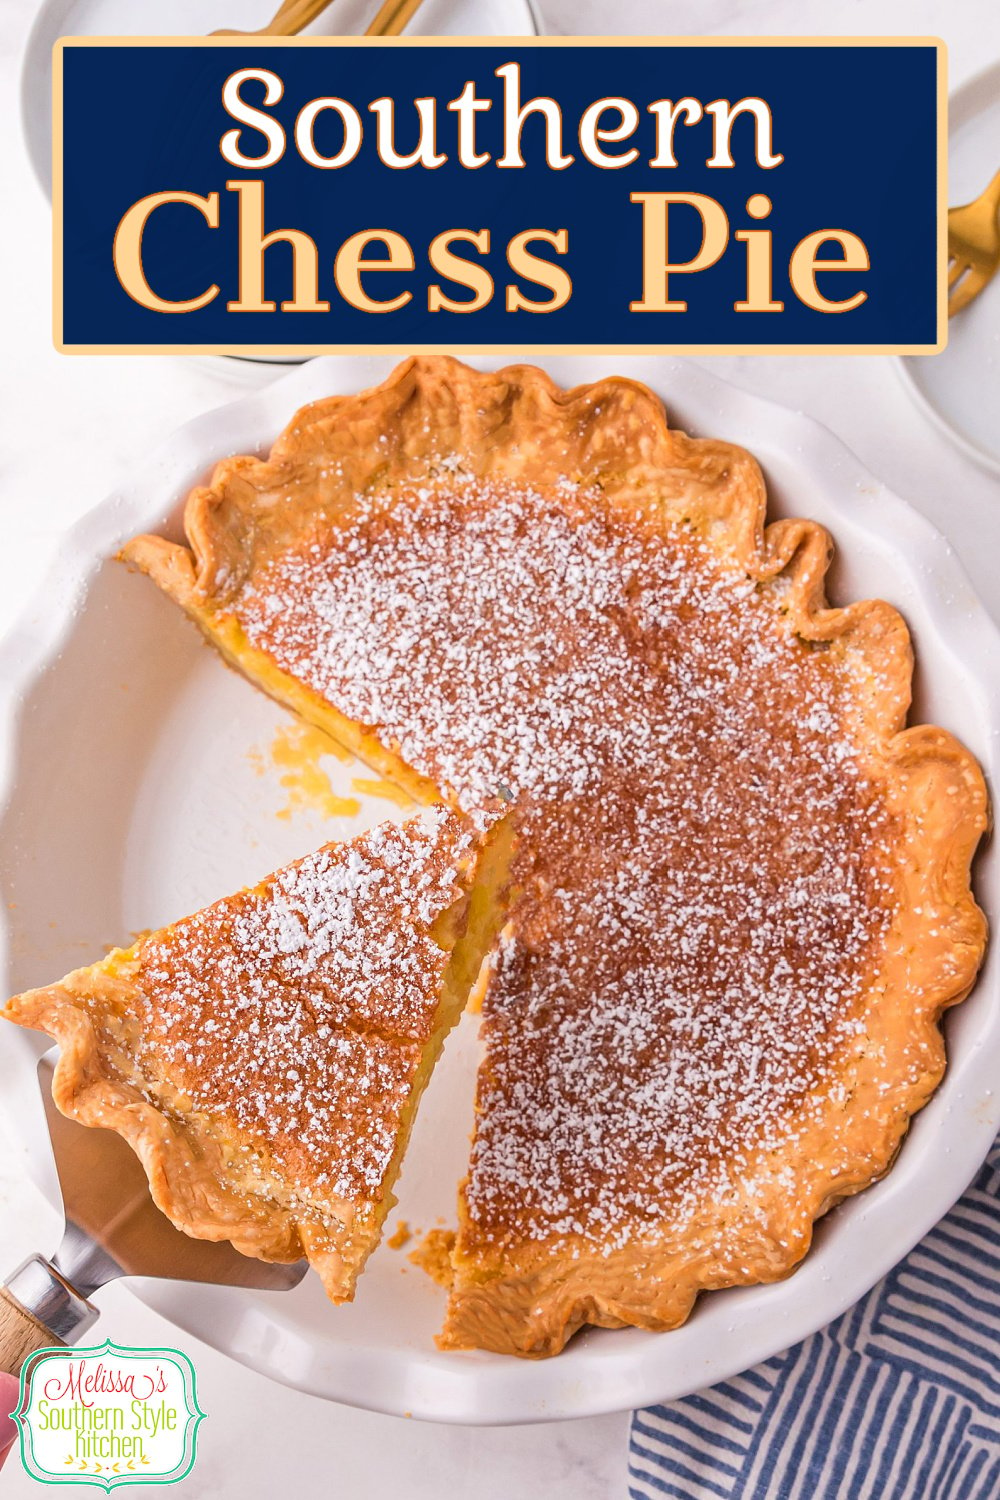 This Southern Chess Pie recipe is made with pantry staples turning ordinary ingredients into an extraordinary dessert. #chesspie #chesspierecipe #southernchesspie #easypierecipes #pie #easypierecipes via @melissasssk